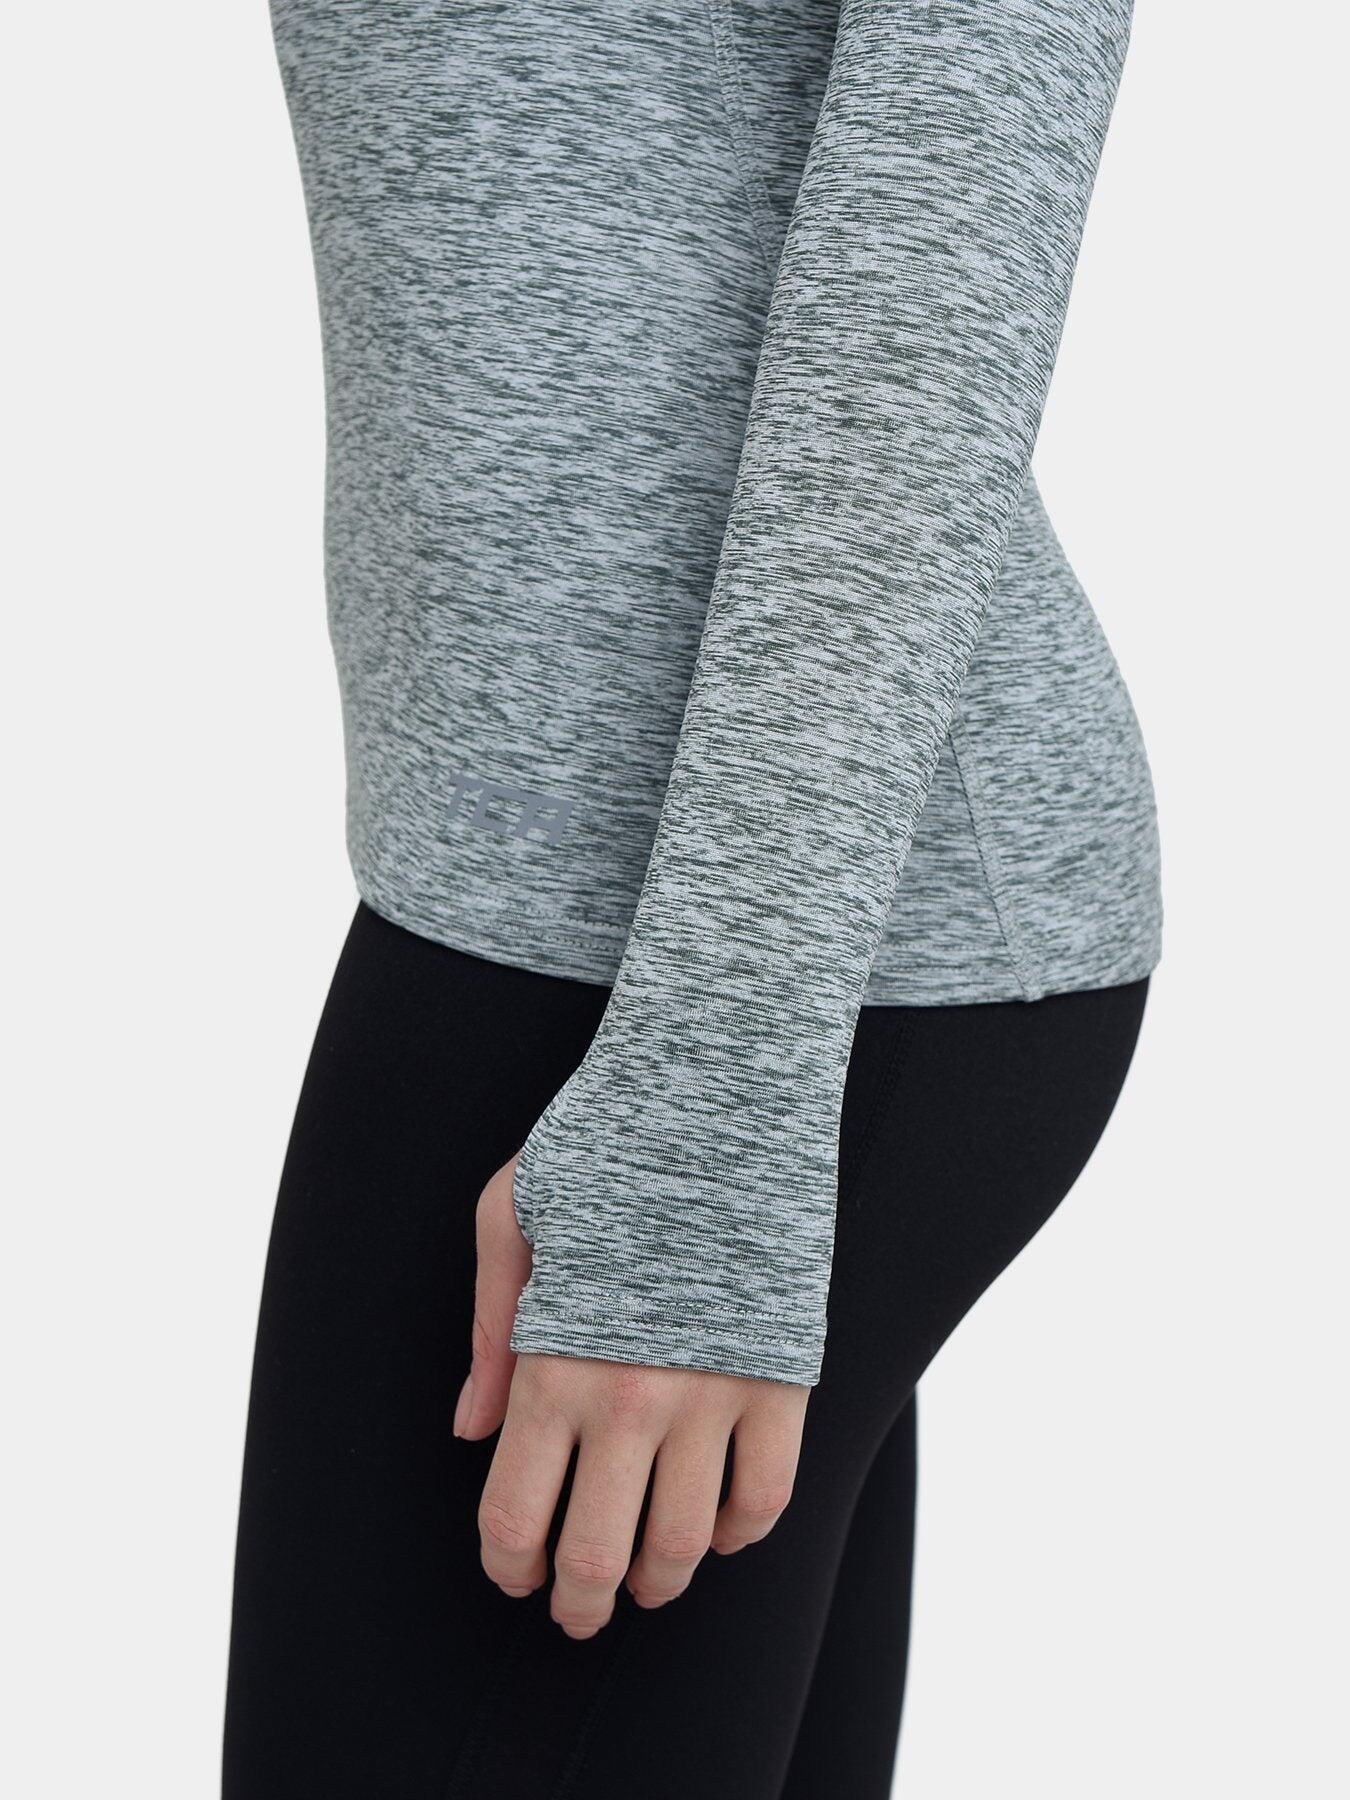 Women's Thermal Funnel Neck Top - Quiet Shade Marl 4/5